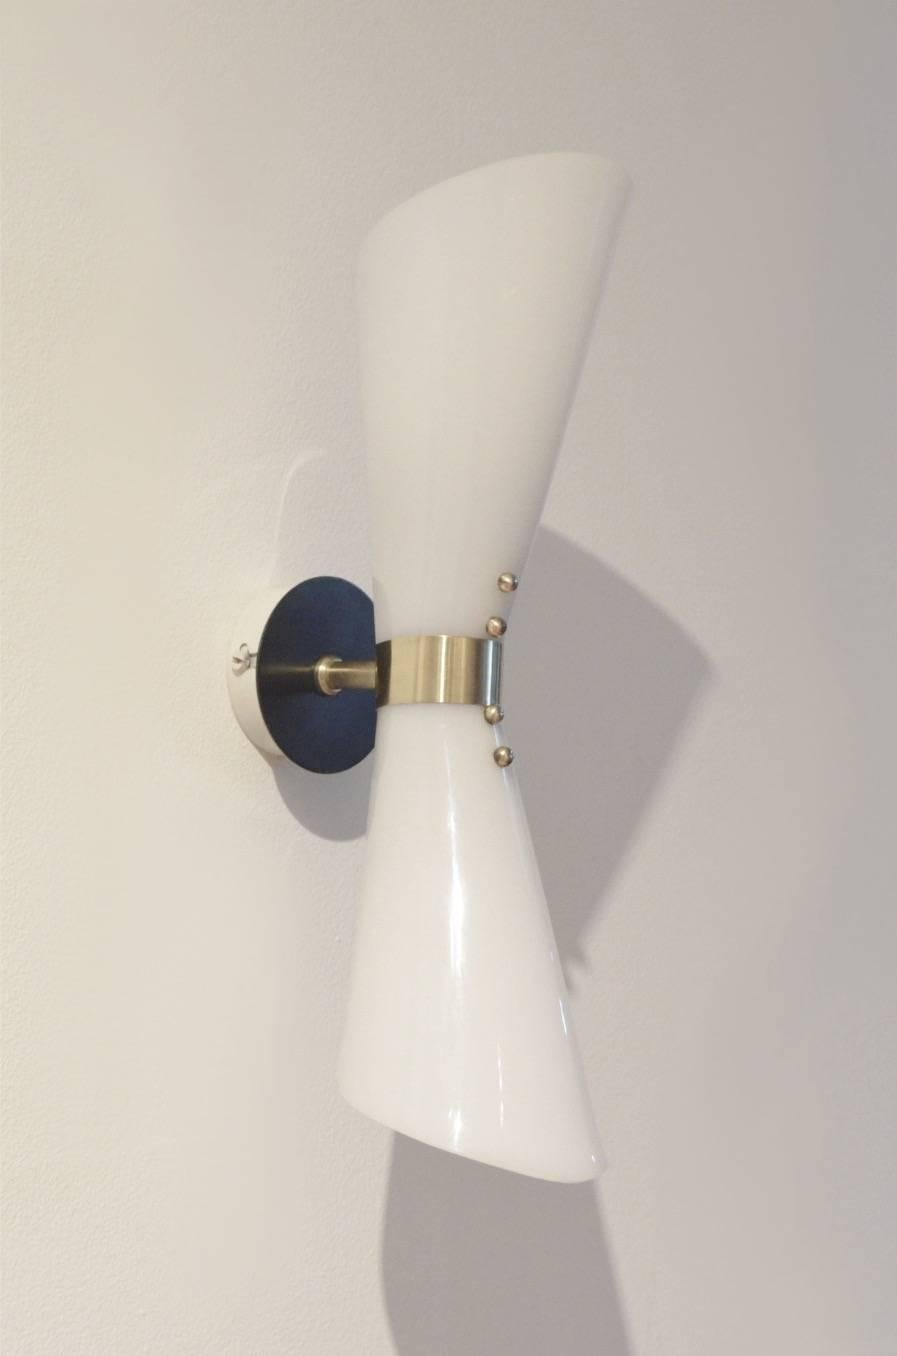 Decorative set of two Italian wall sconces made of a combination of black and white painted metal matched with brass and diabolo shaped plexiglass shades.